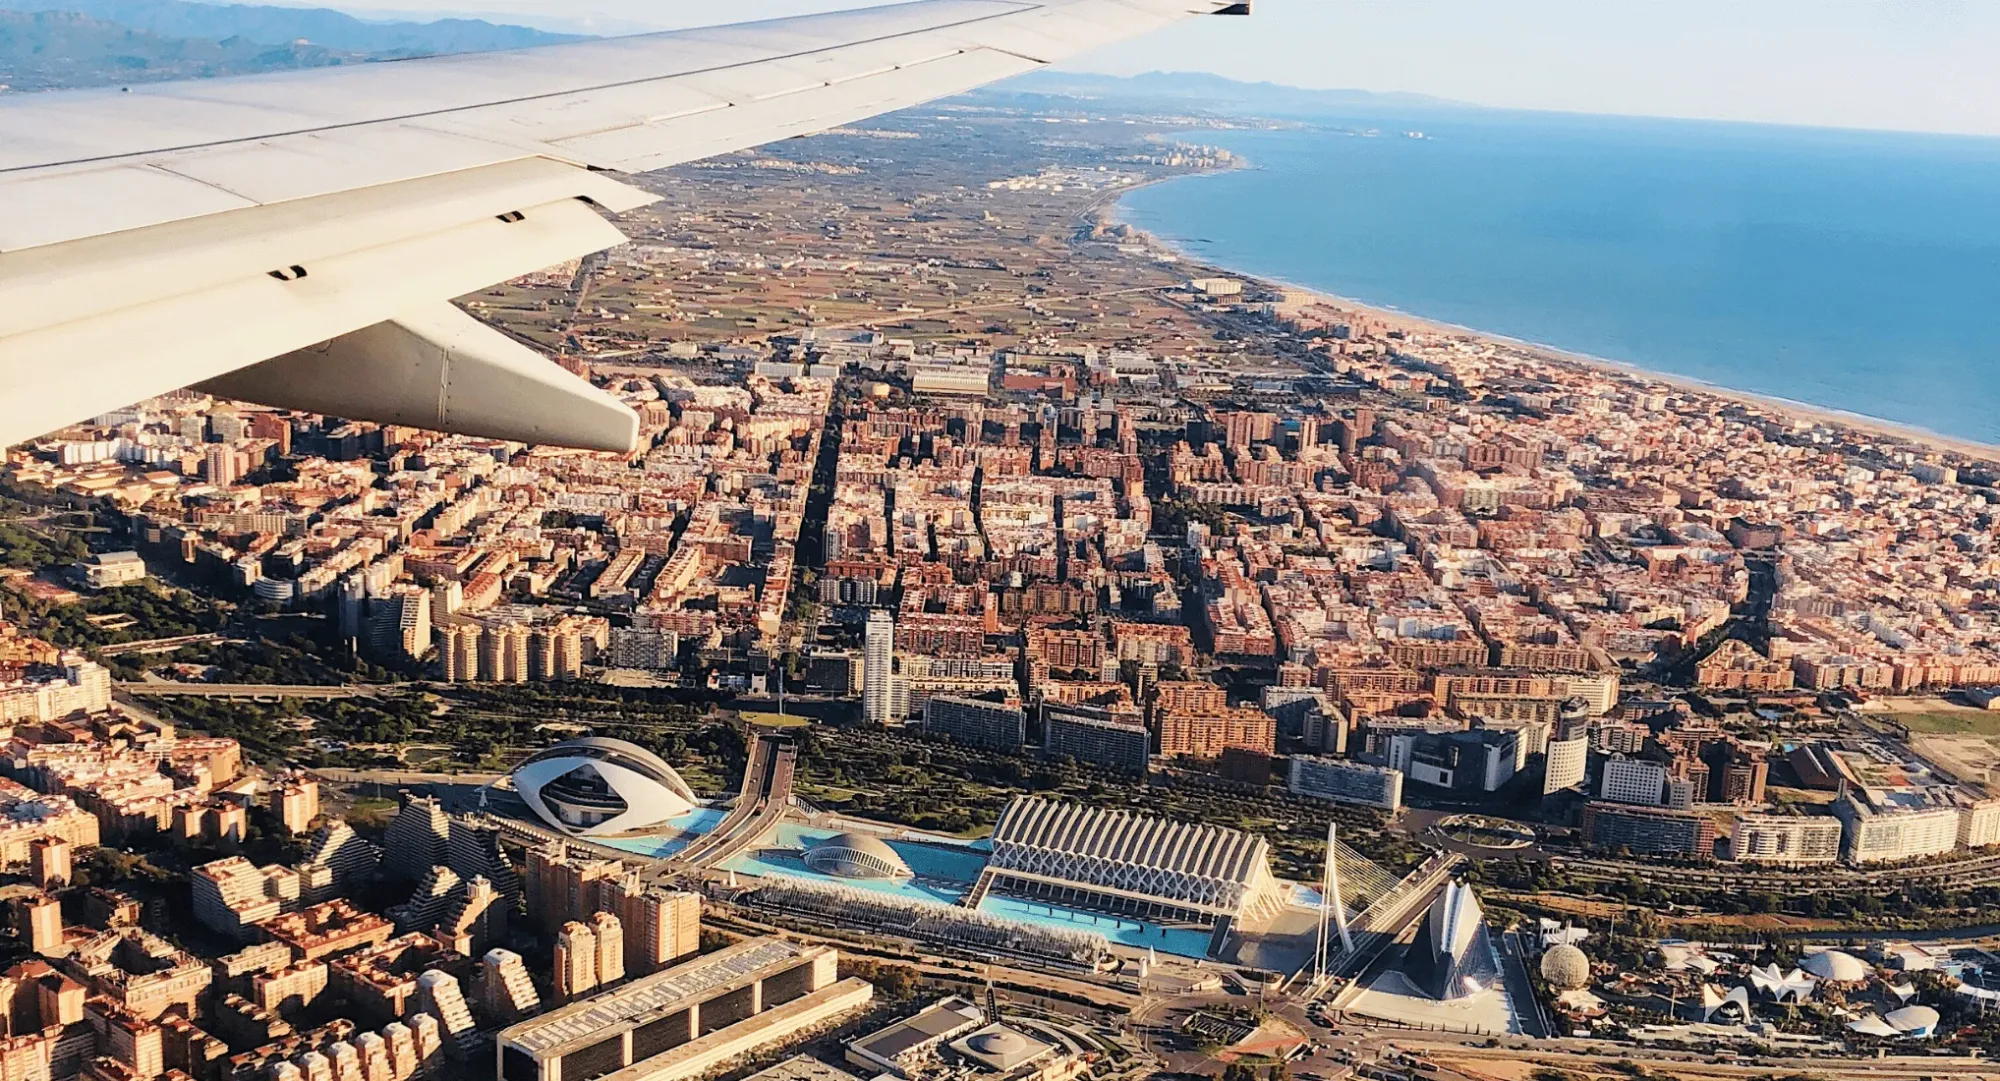 Airplace flying over Valencia